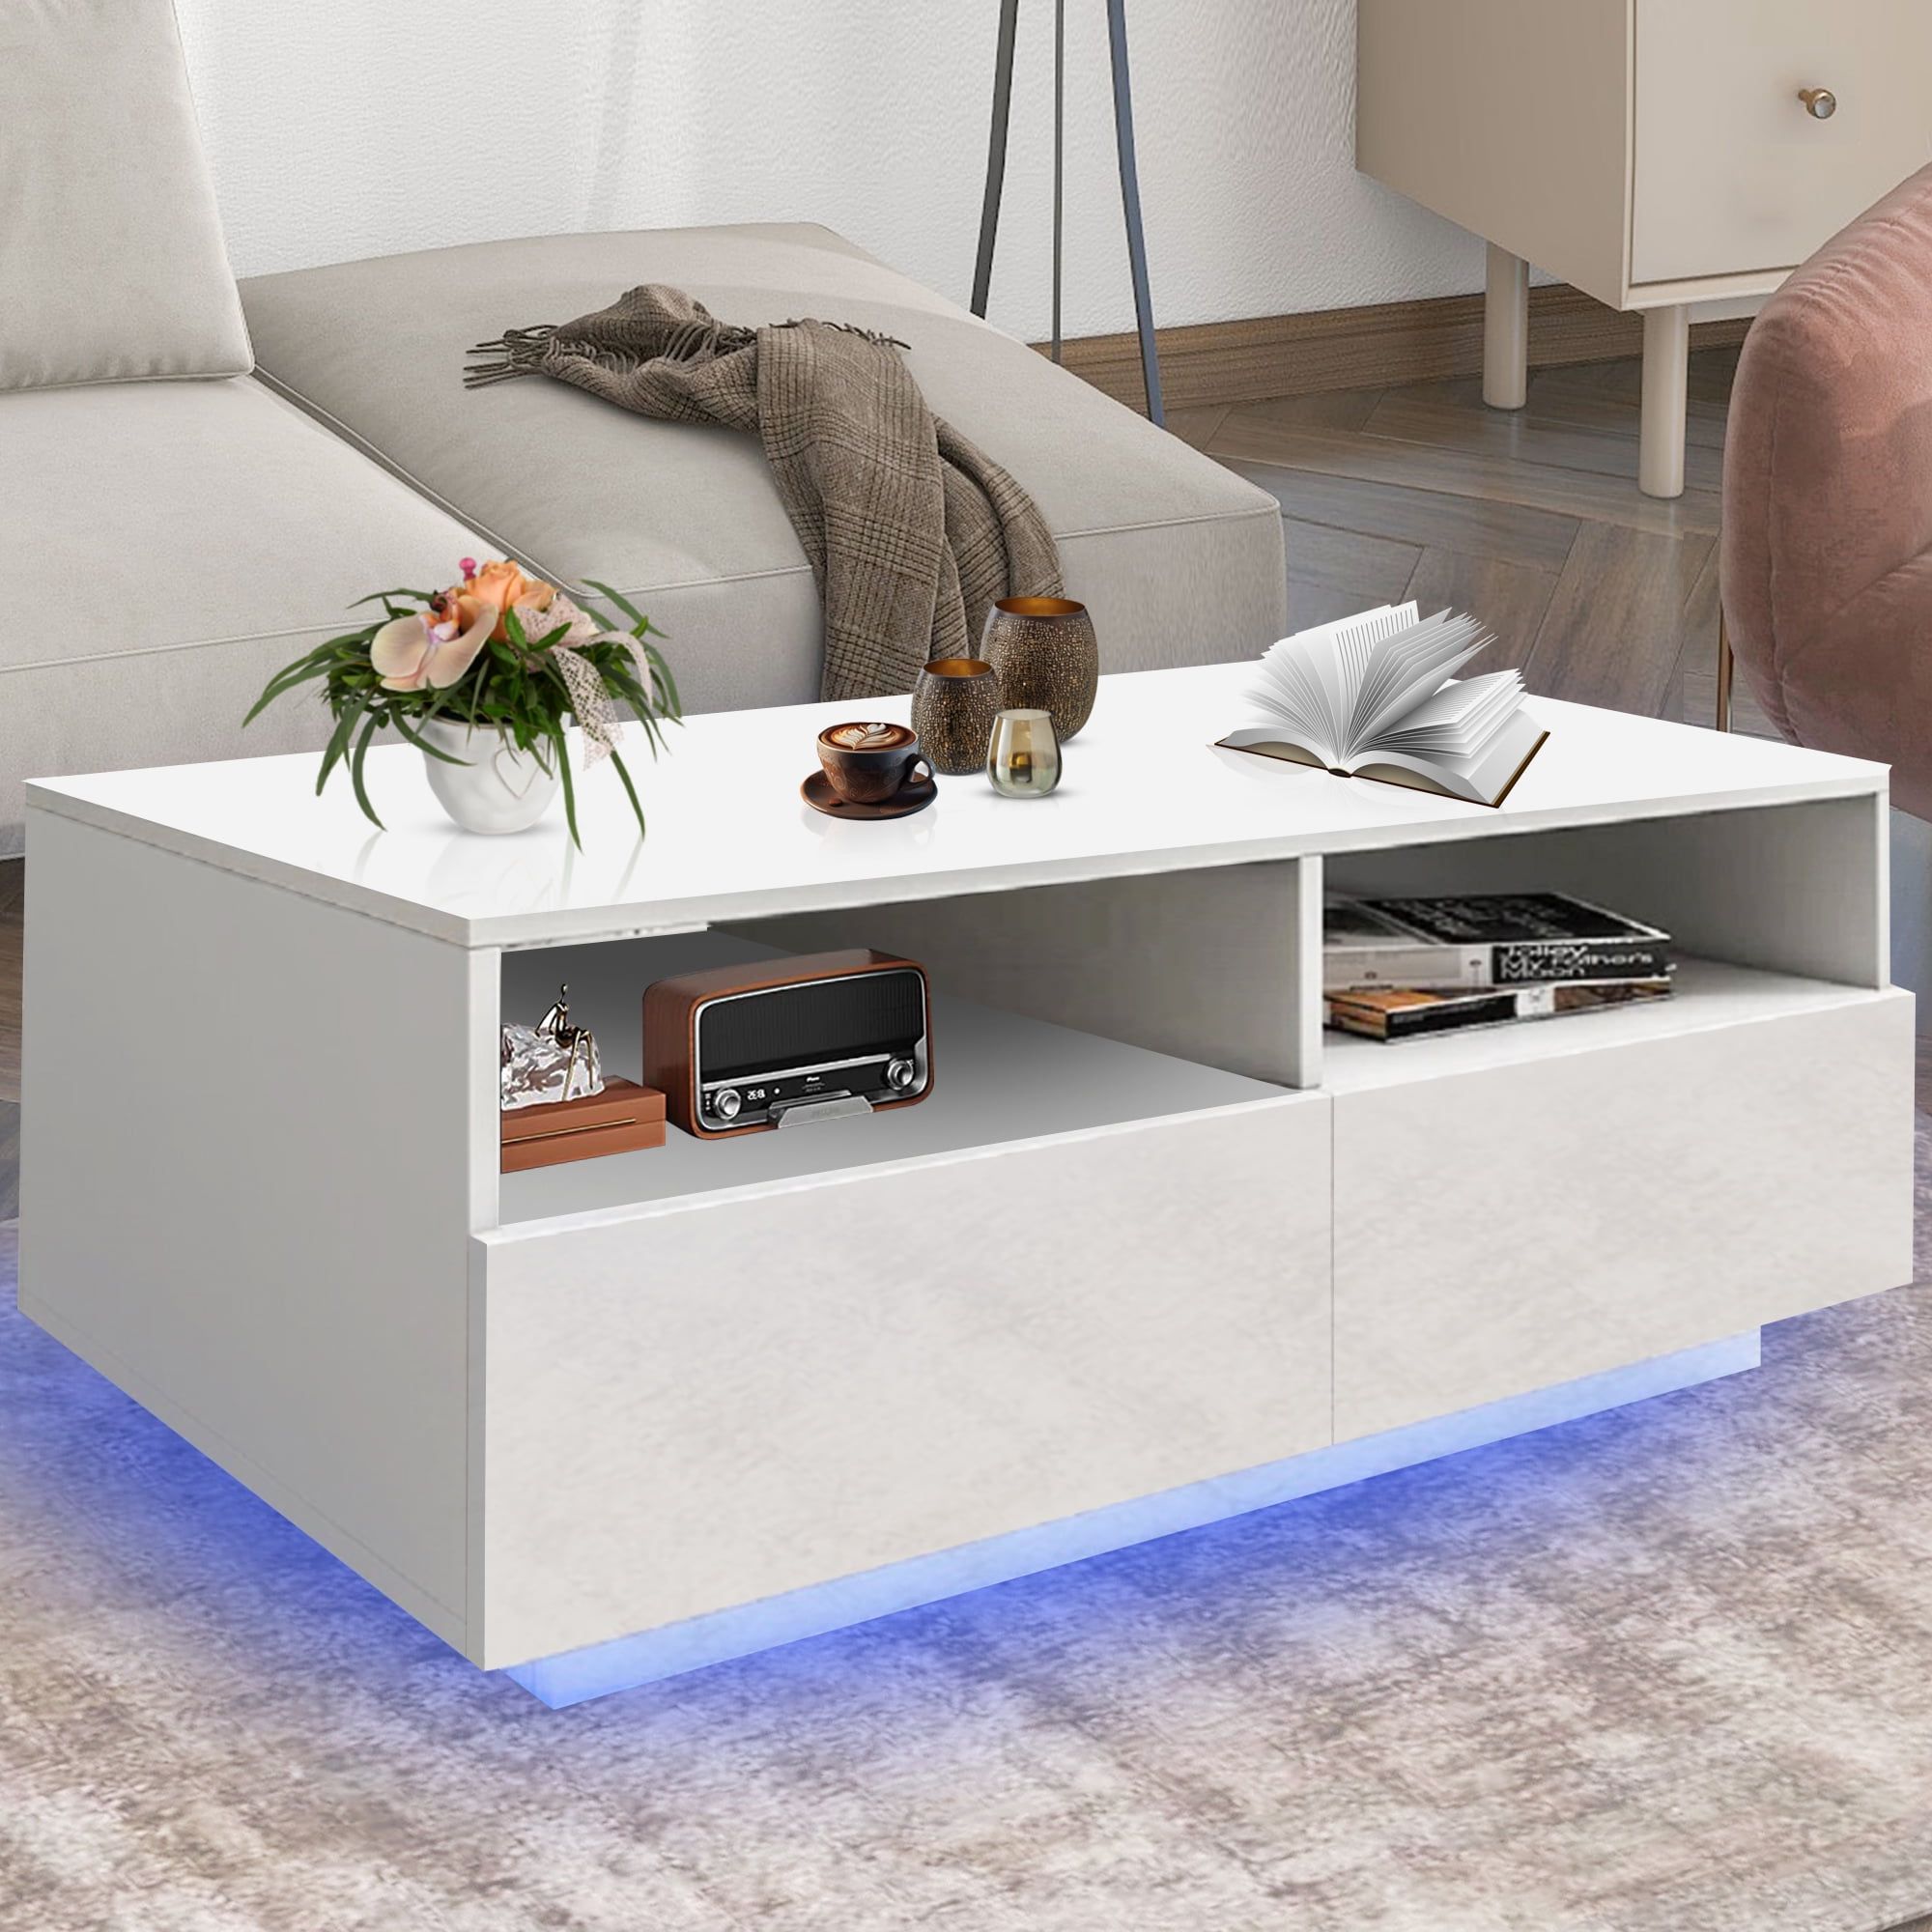 Most Recent Rectangular Led Coffee Tables Pertaining To Syngar Led Coffee Table With 4 Storage Sliding Drawers And Open Shelves,  Modern High Glossy Center Table Rectangular With Multiple Colors Led Lights  For Living Room Bedroom, Easy Assembly, White – Walmart (Photo 9 of 10)